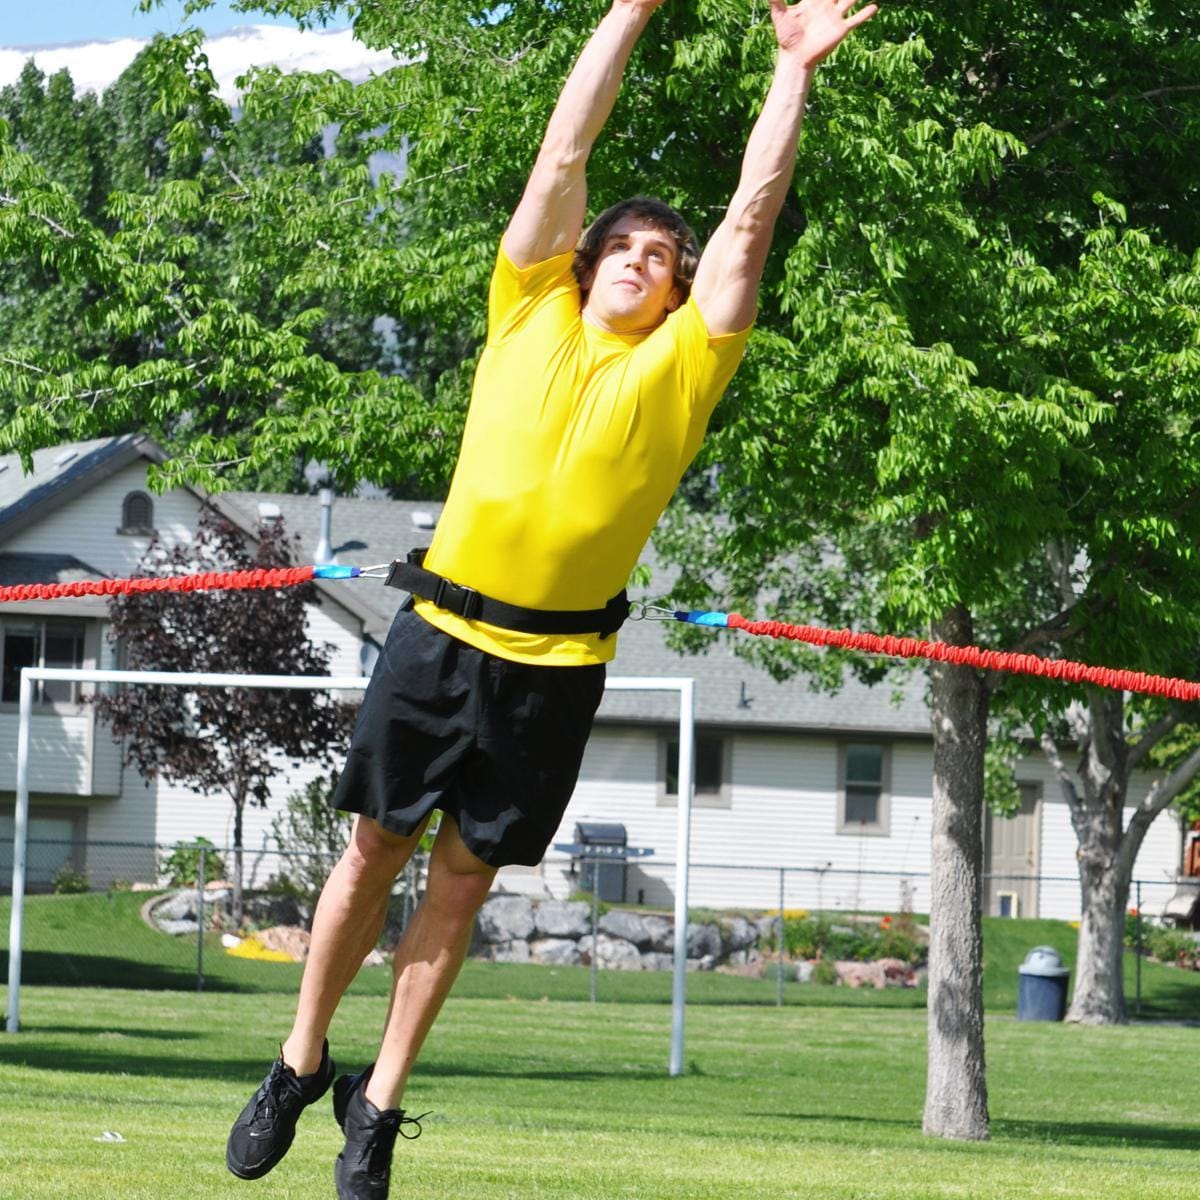 On field jump training system for Basketball, baseball, softball, rugby, soccer and so many more sports. use this system to increase jump height quickly in any athlete from youth to high school and even college organizations use this resistance band